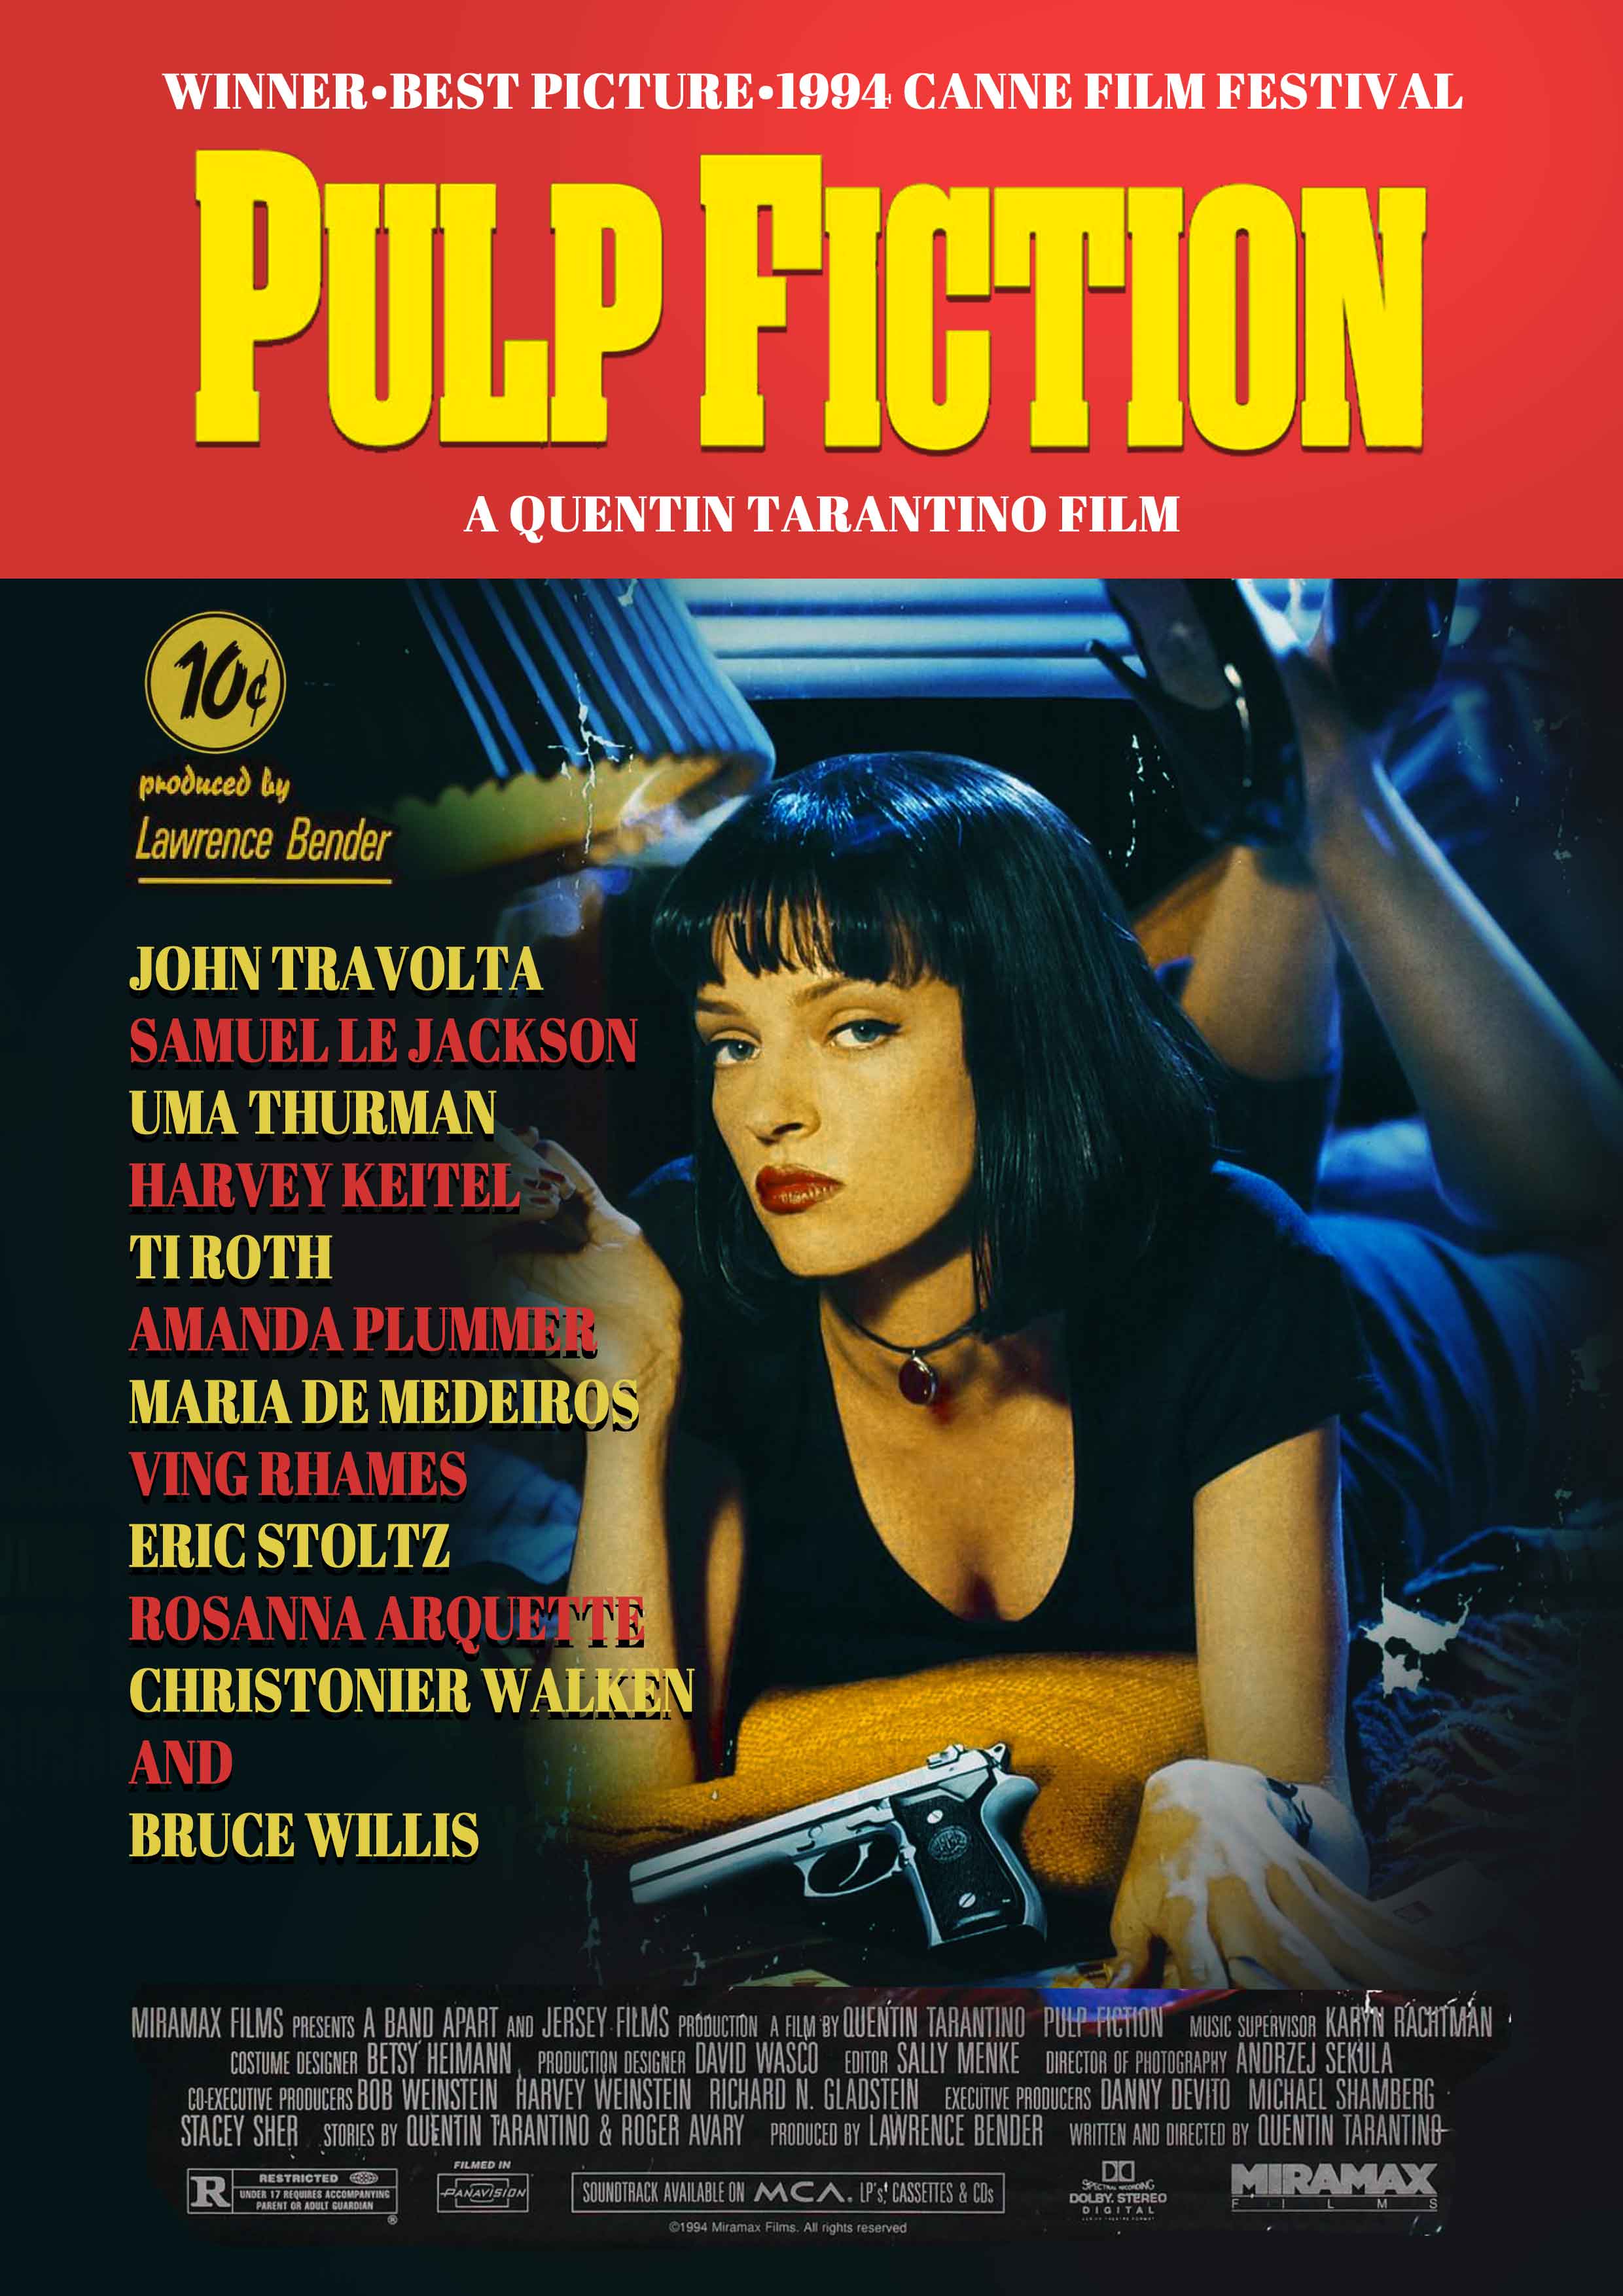 Pulp Fiction, At the Movies Shop, Soundtrack